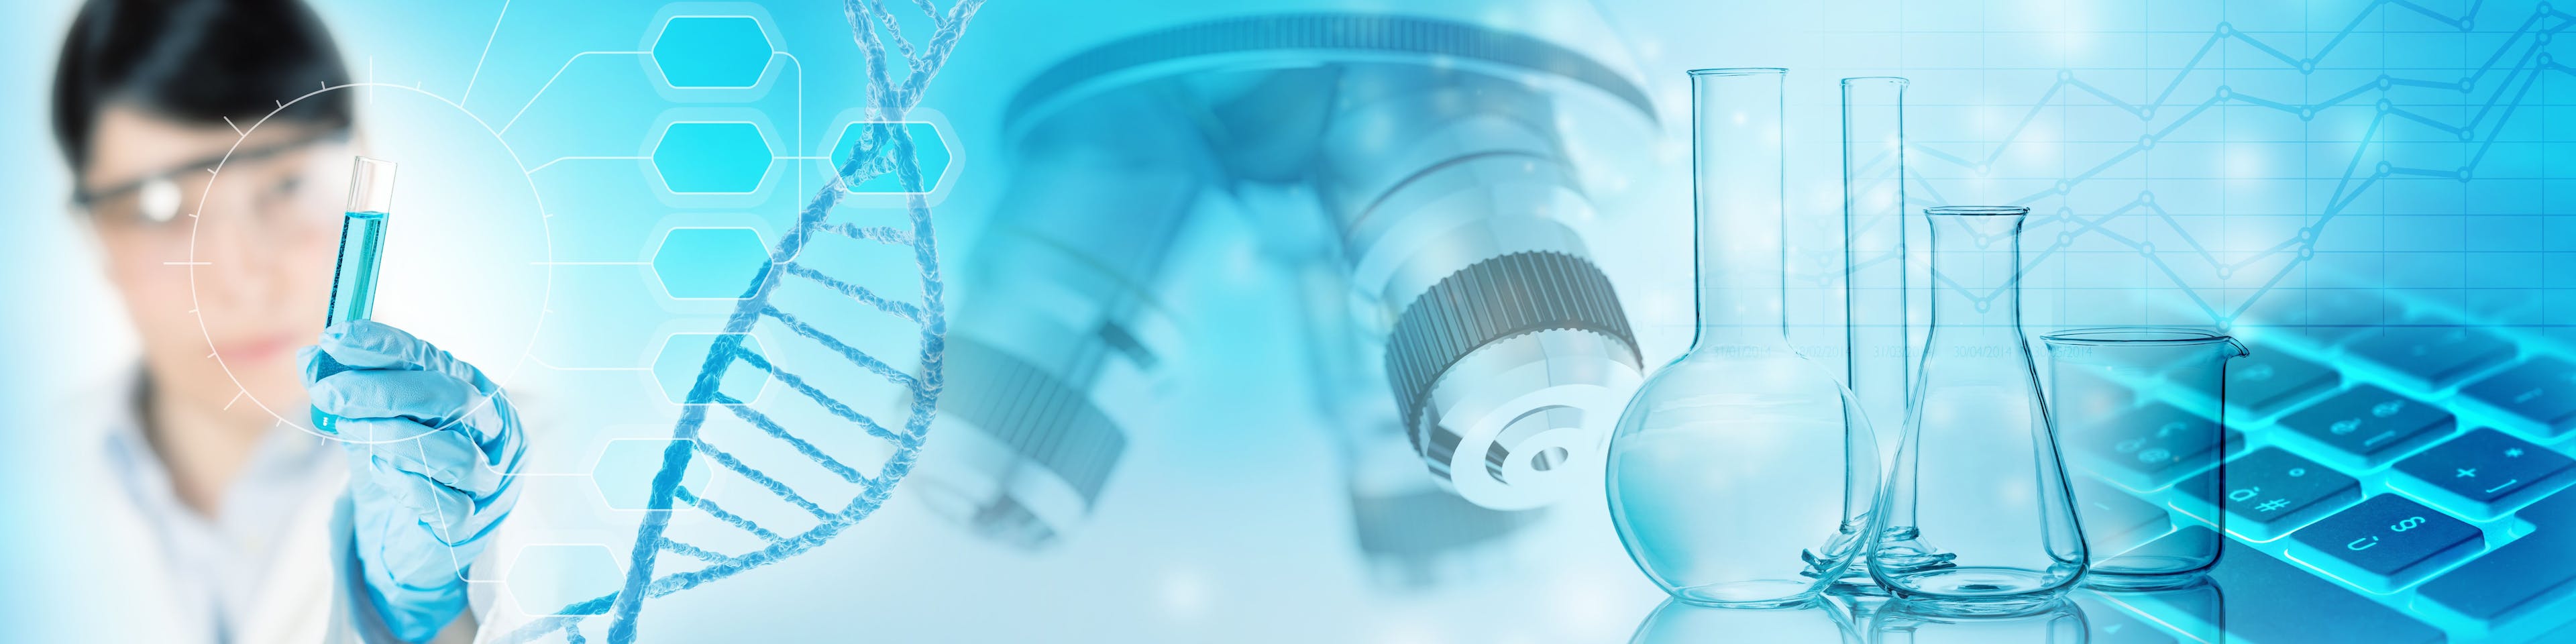 Technical Note: Modifying a Standard HPLC Autosampler for On-Line Process Monitoring